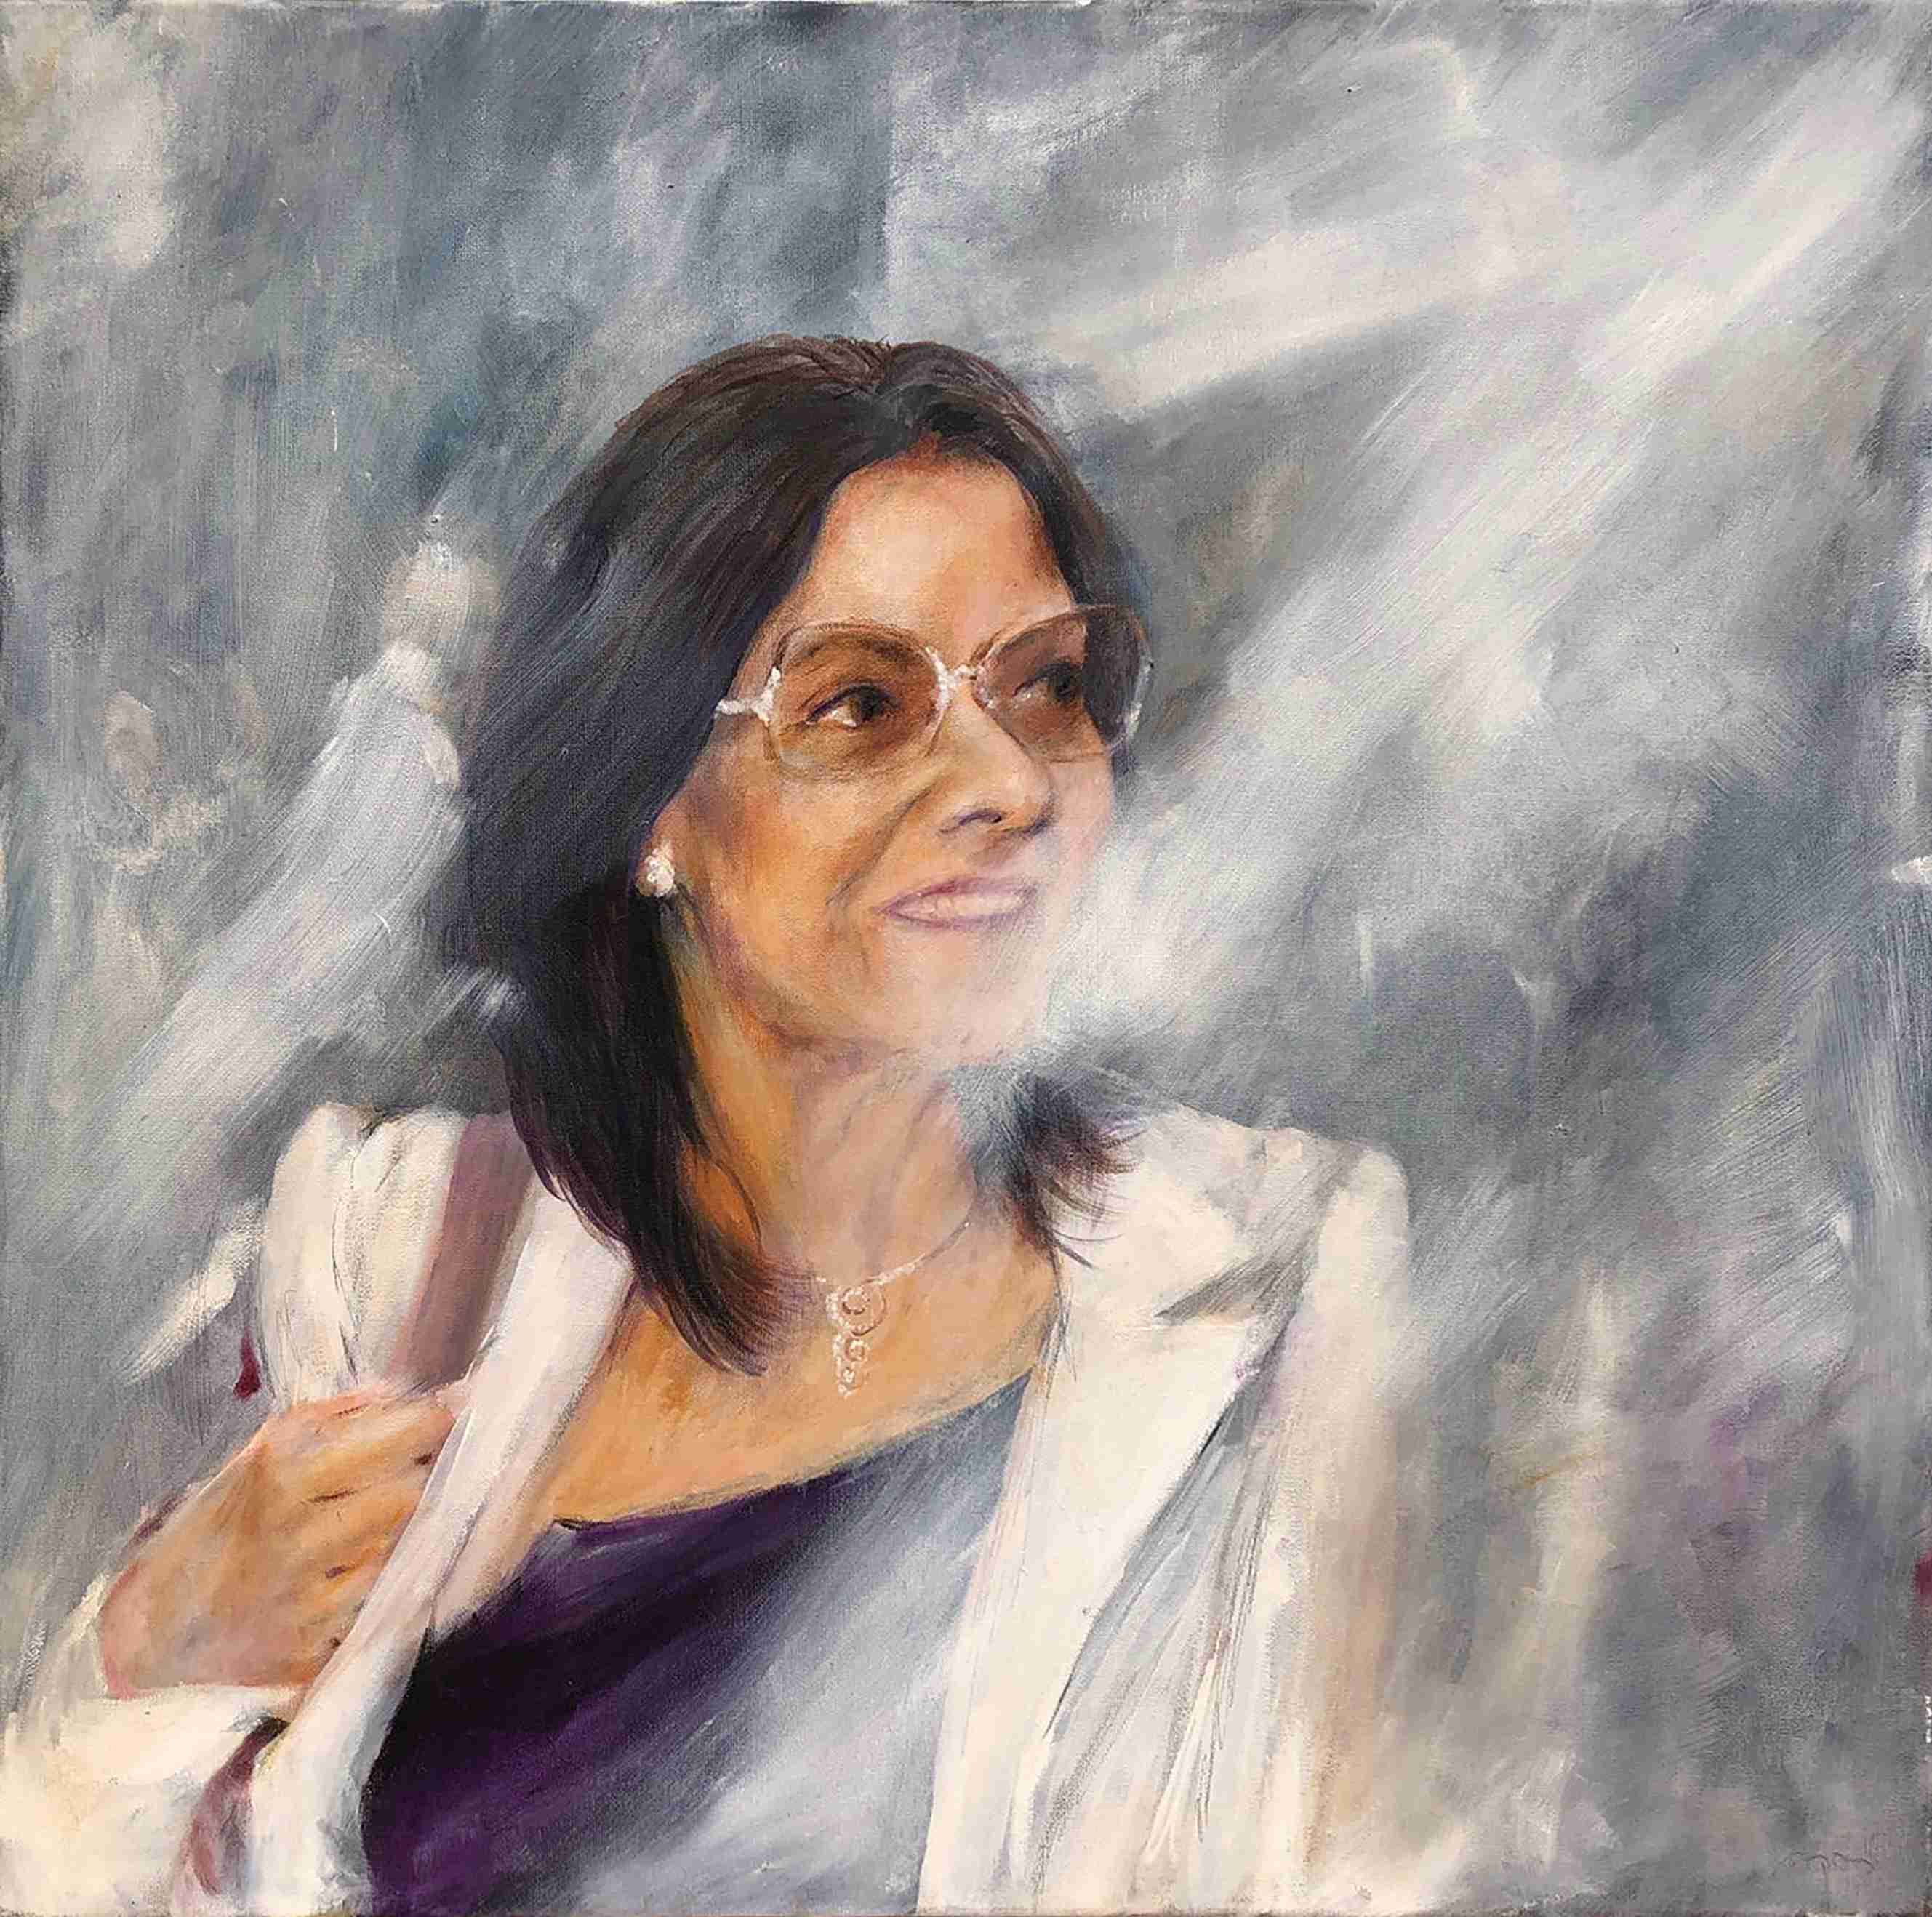 Michal. Oil on canvas, Rivka Aderet Myers